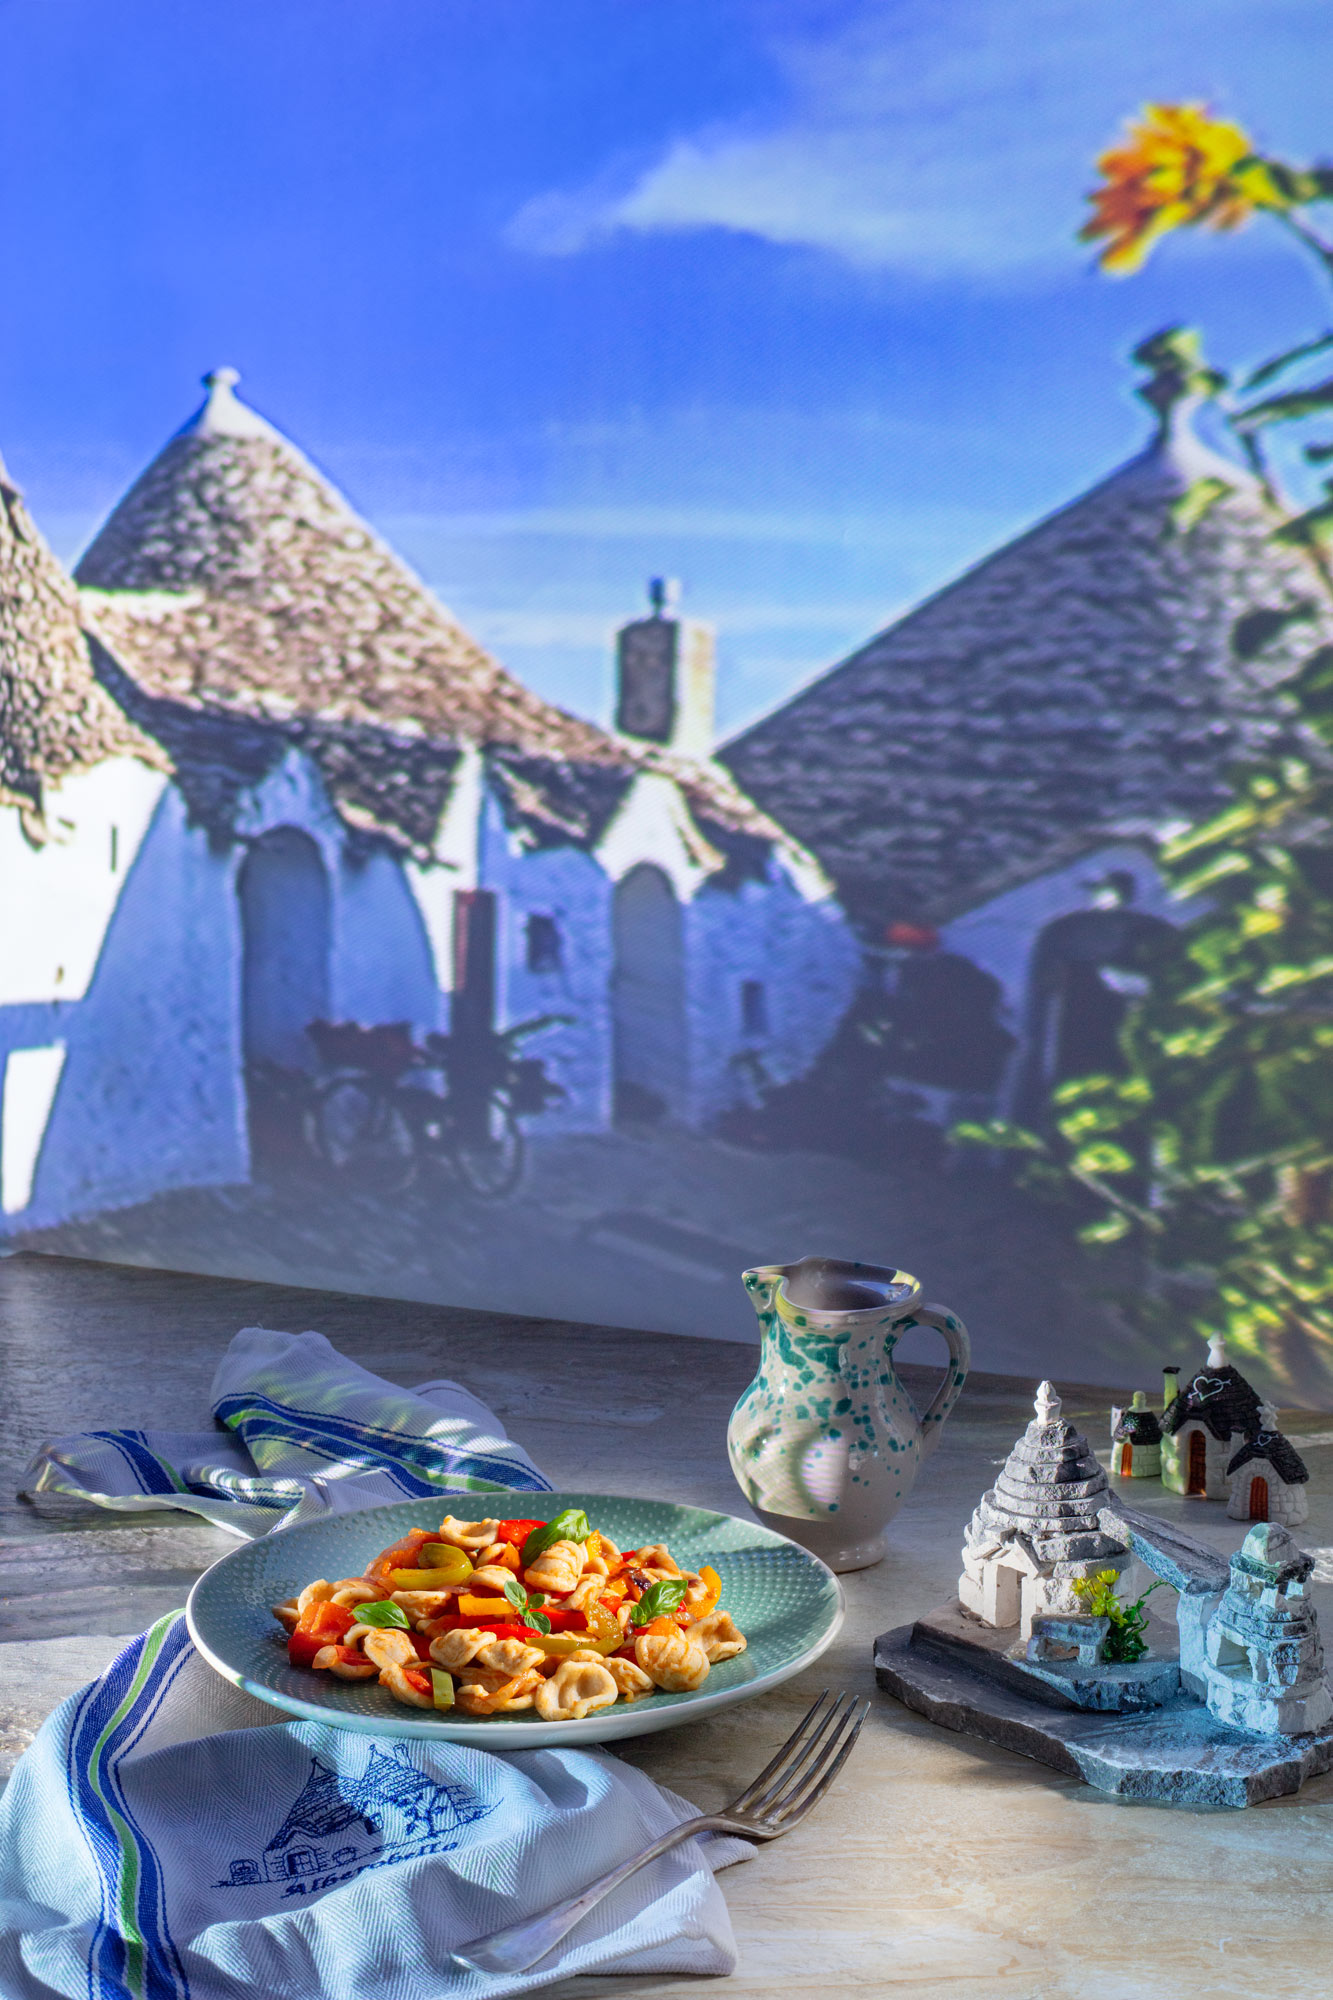 A dish of Orecchiette pasta with peperonata sauce. In the backgroun a view of traditional Trullis, houses popular in the Apulia region of Italy. Small models of Trullis surrounding the dish. 